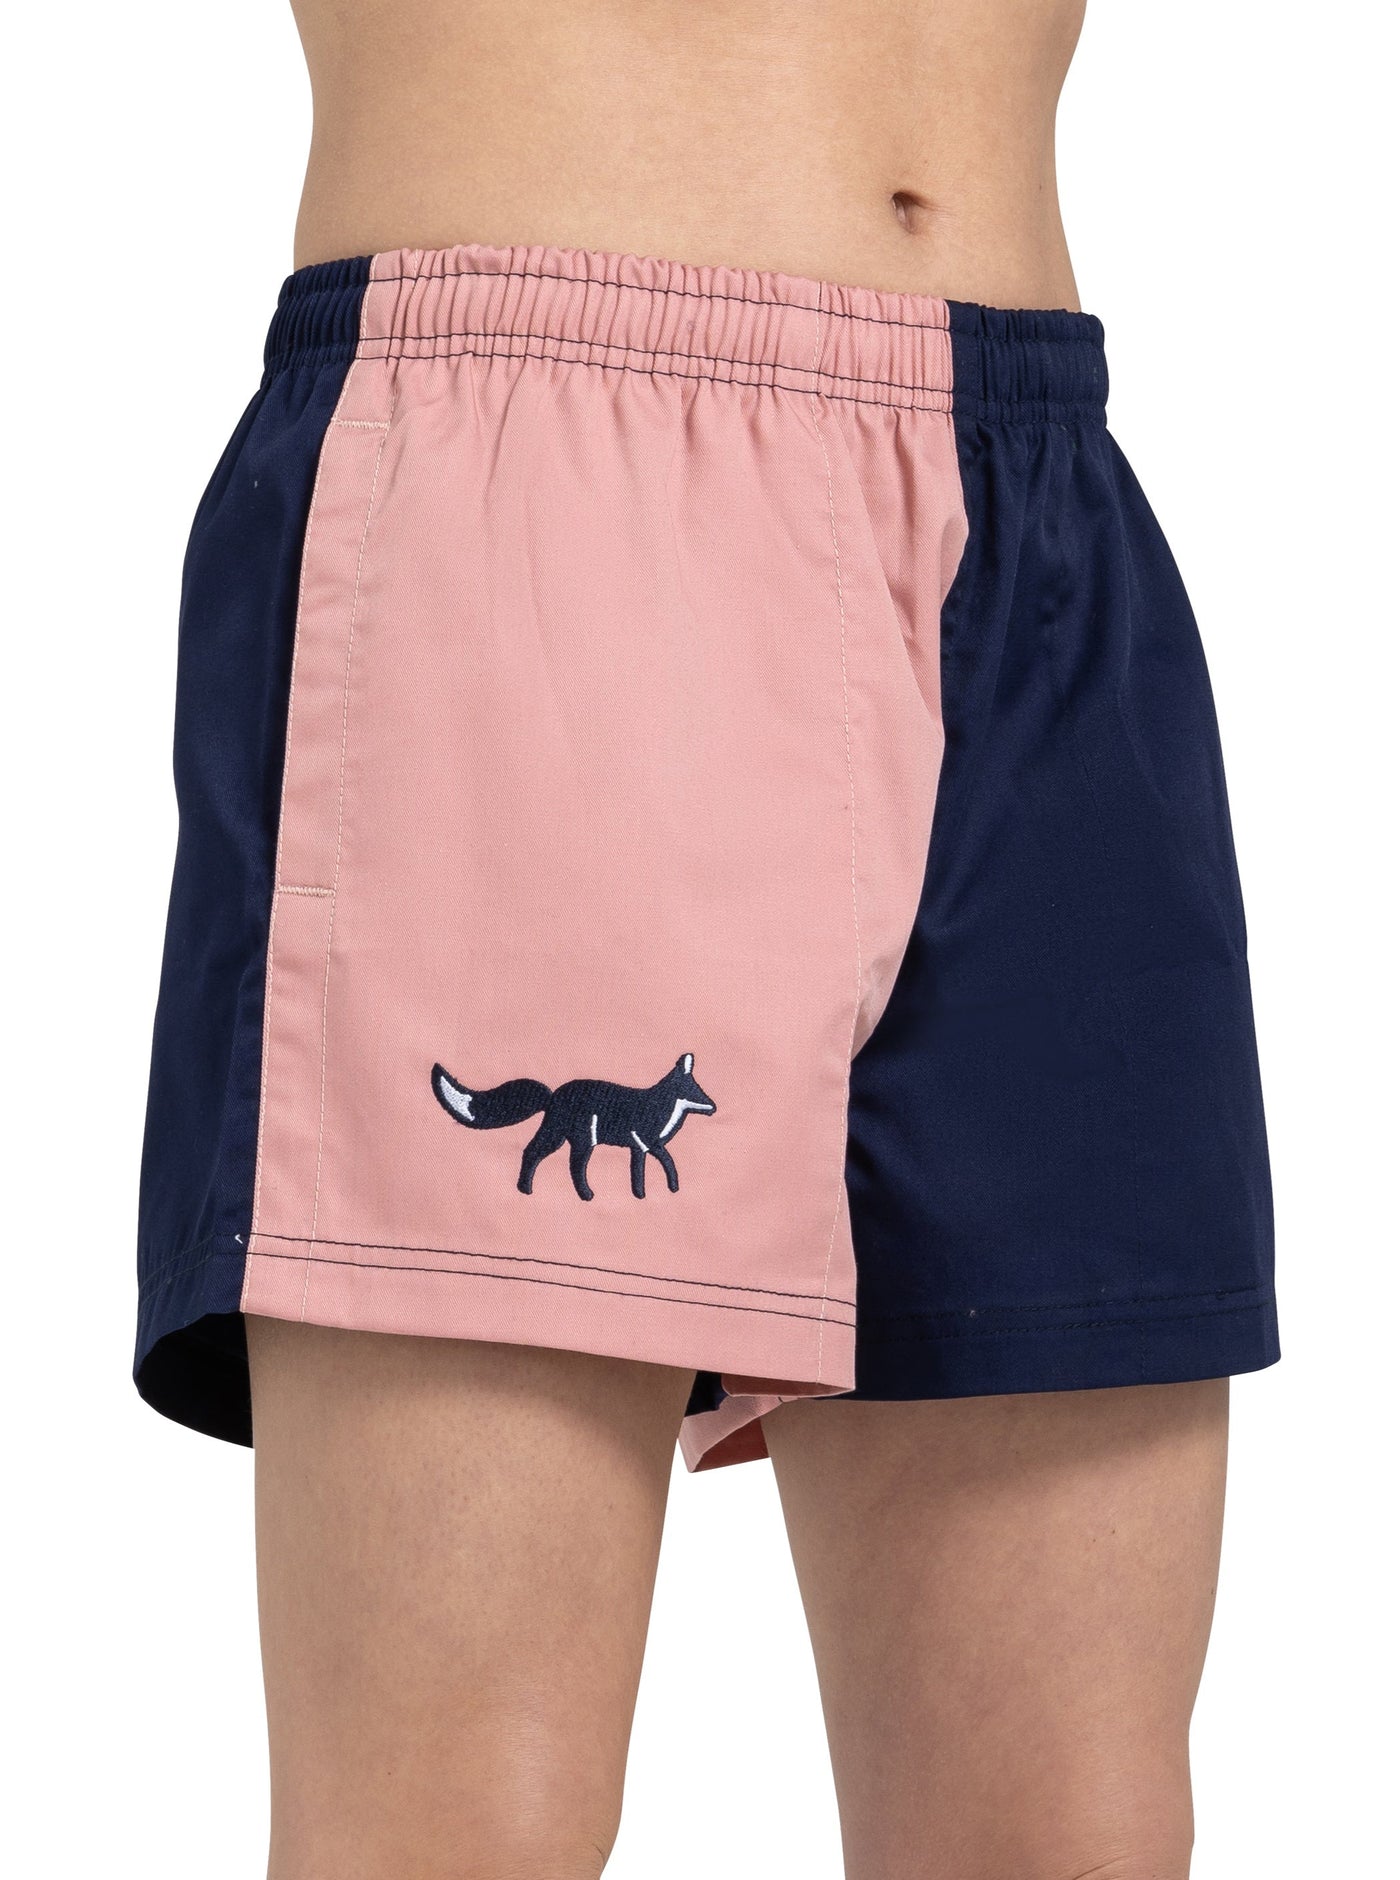 Unisex Harlequin Shorts - Pink and Navy